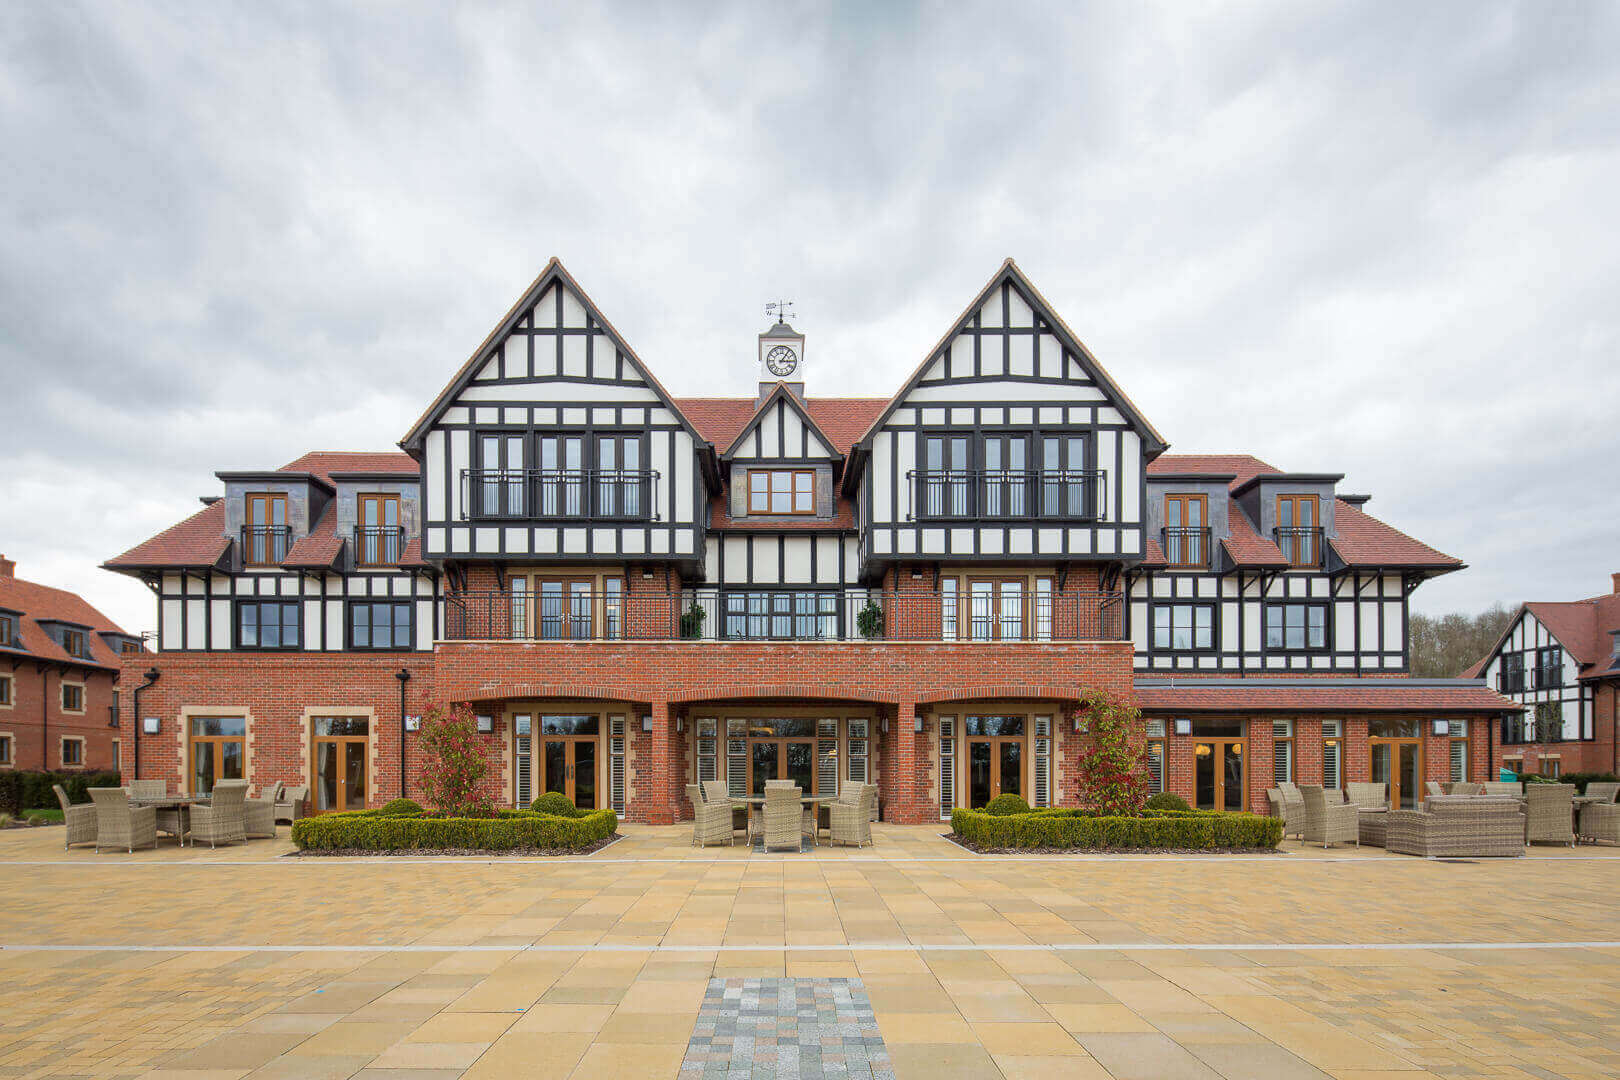 Commercial Architecture, Interiors & Aerial Photography - New construction and refurbishment at Great Alne Park retirement village, Warwickshire